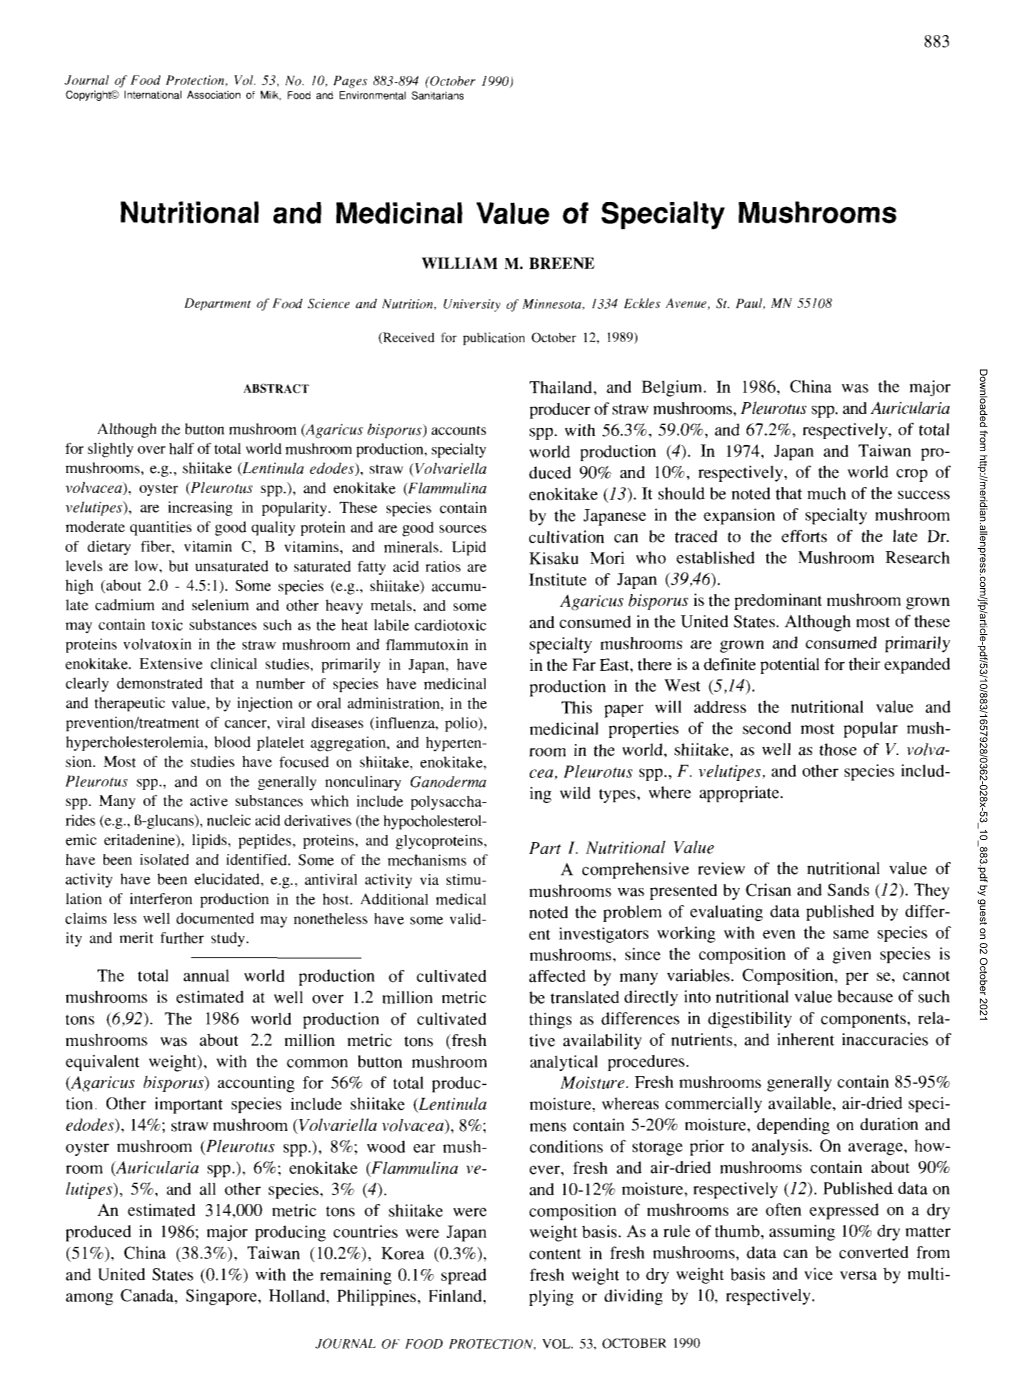 Nutritional and Medicinal Value of Specialty Mushrooms